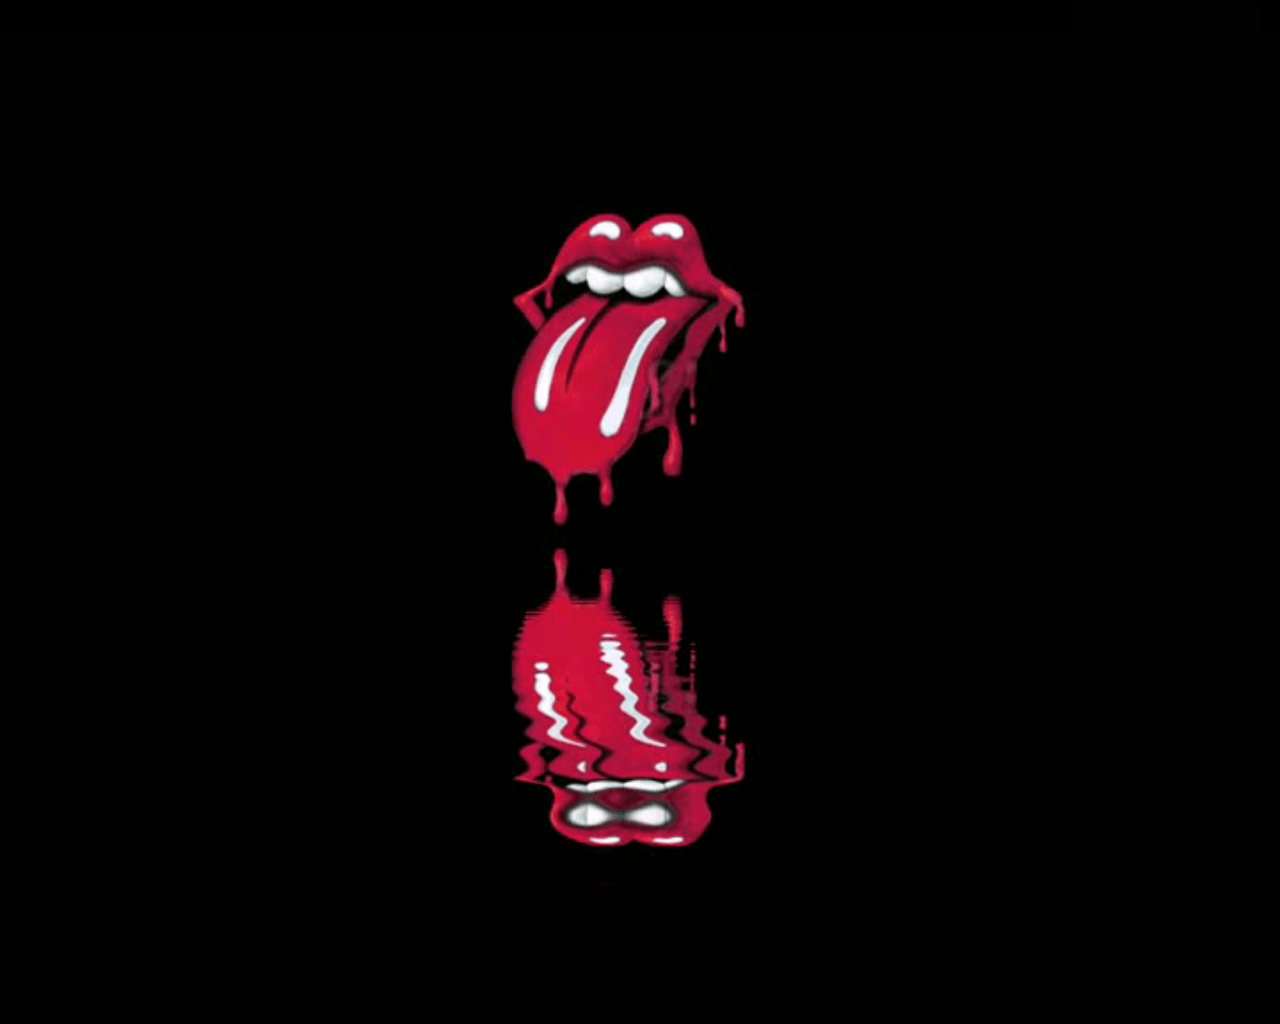 Rolling Stones Tongue.. 2009 2014 vippe1 rolling stones tongue